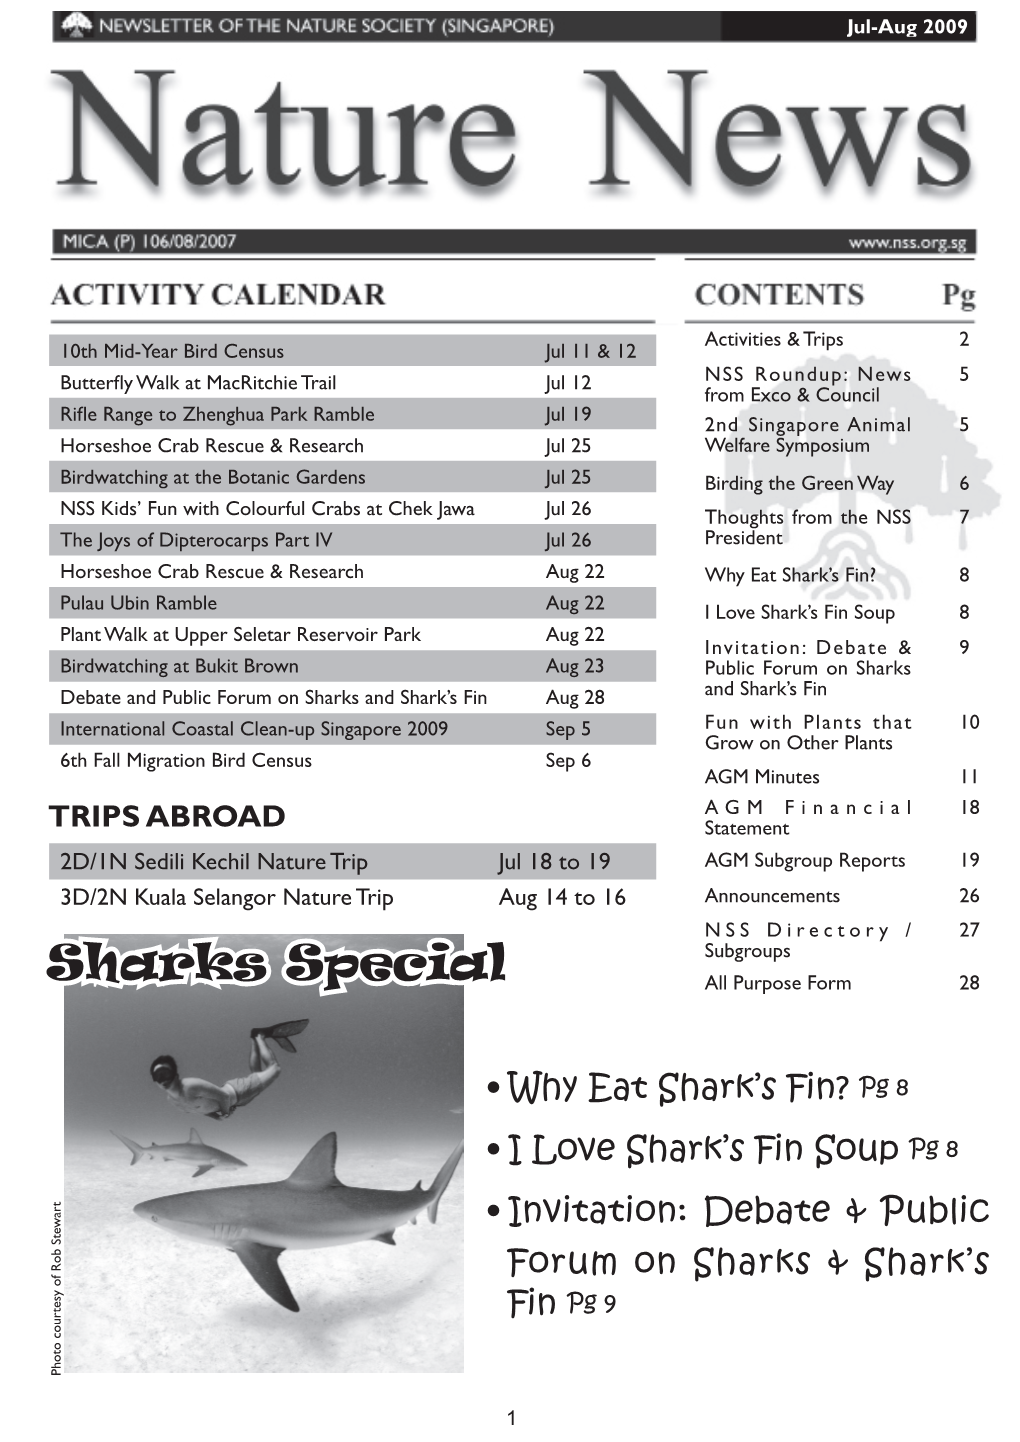 Sharks Special All Purpose Form 28